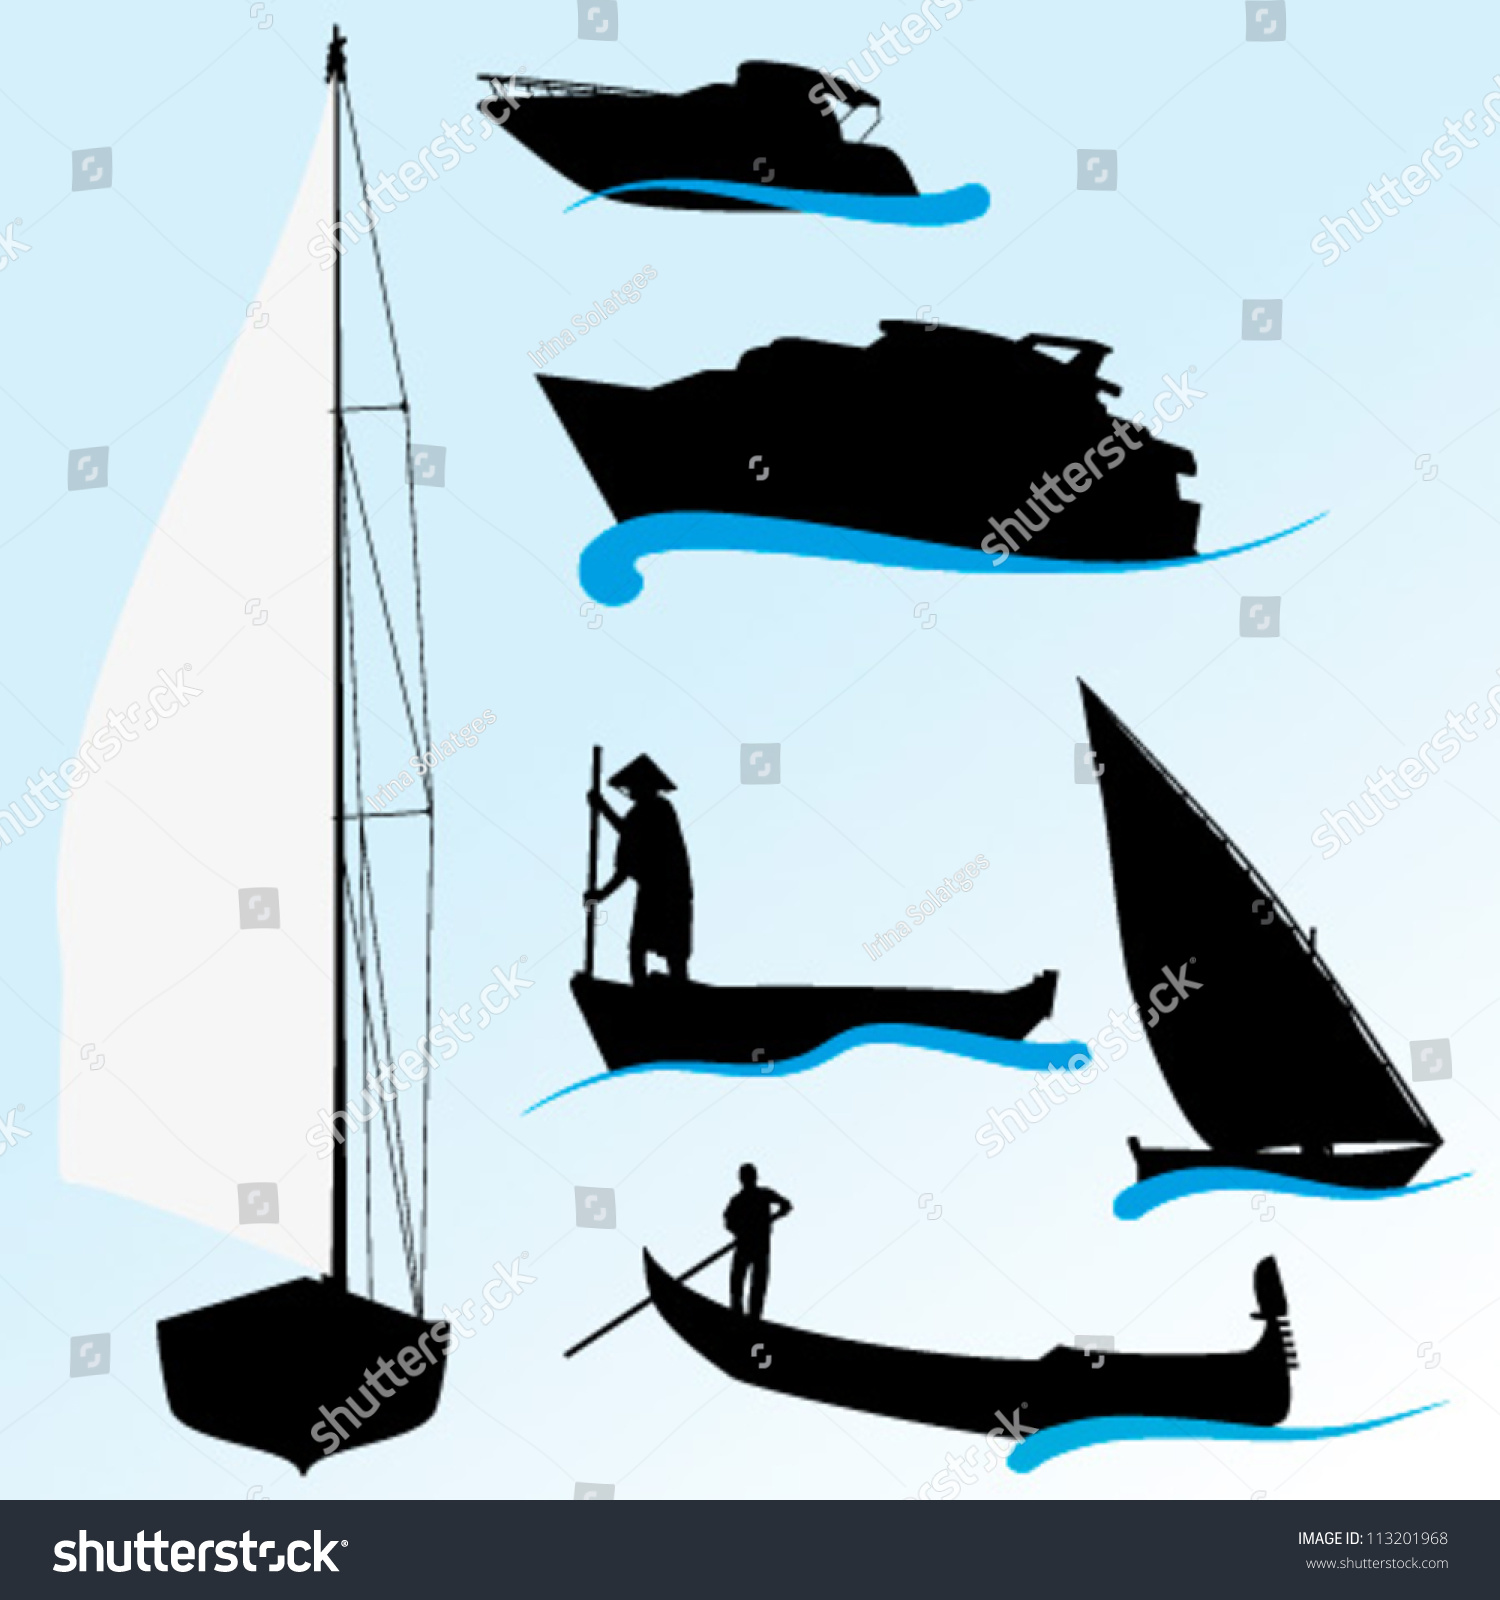 Set Of Vector Boat Silhouettes - 113201968 : Shutterstock